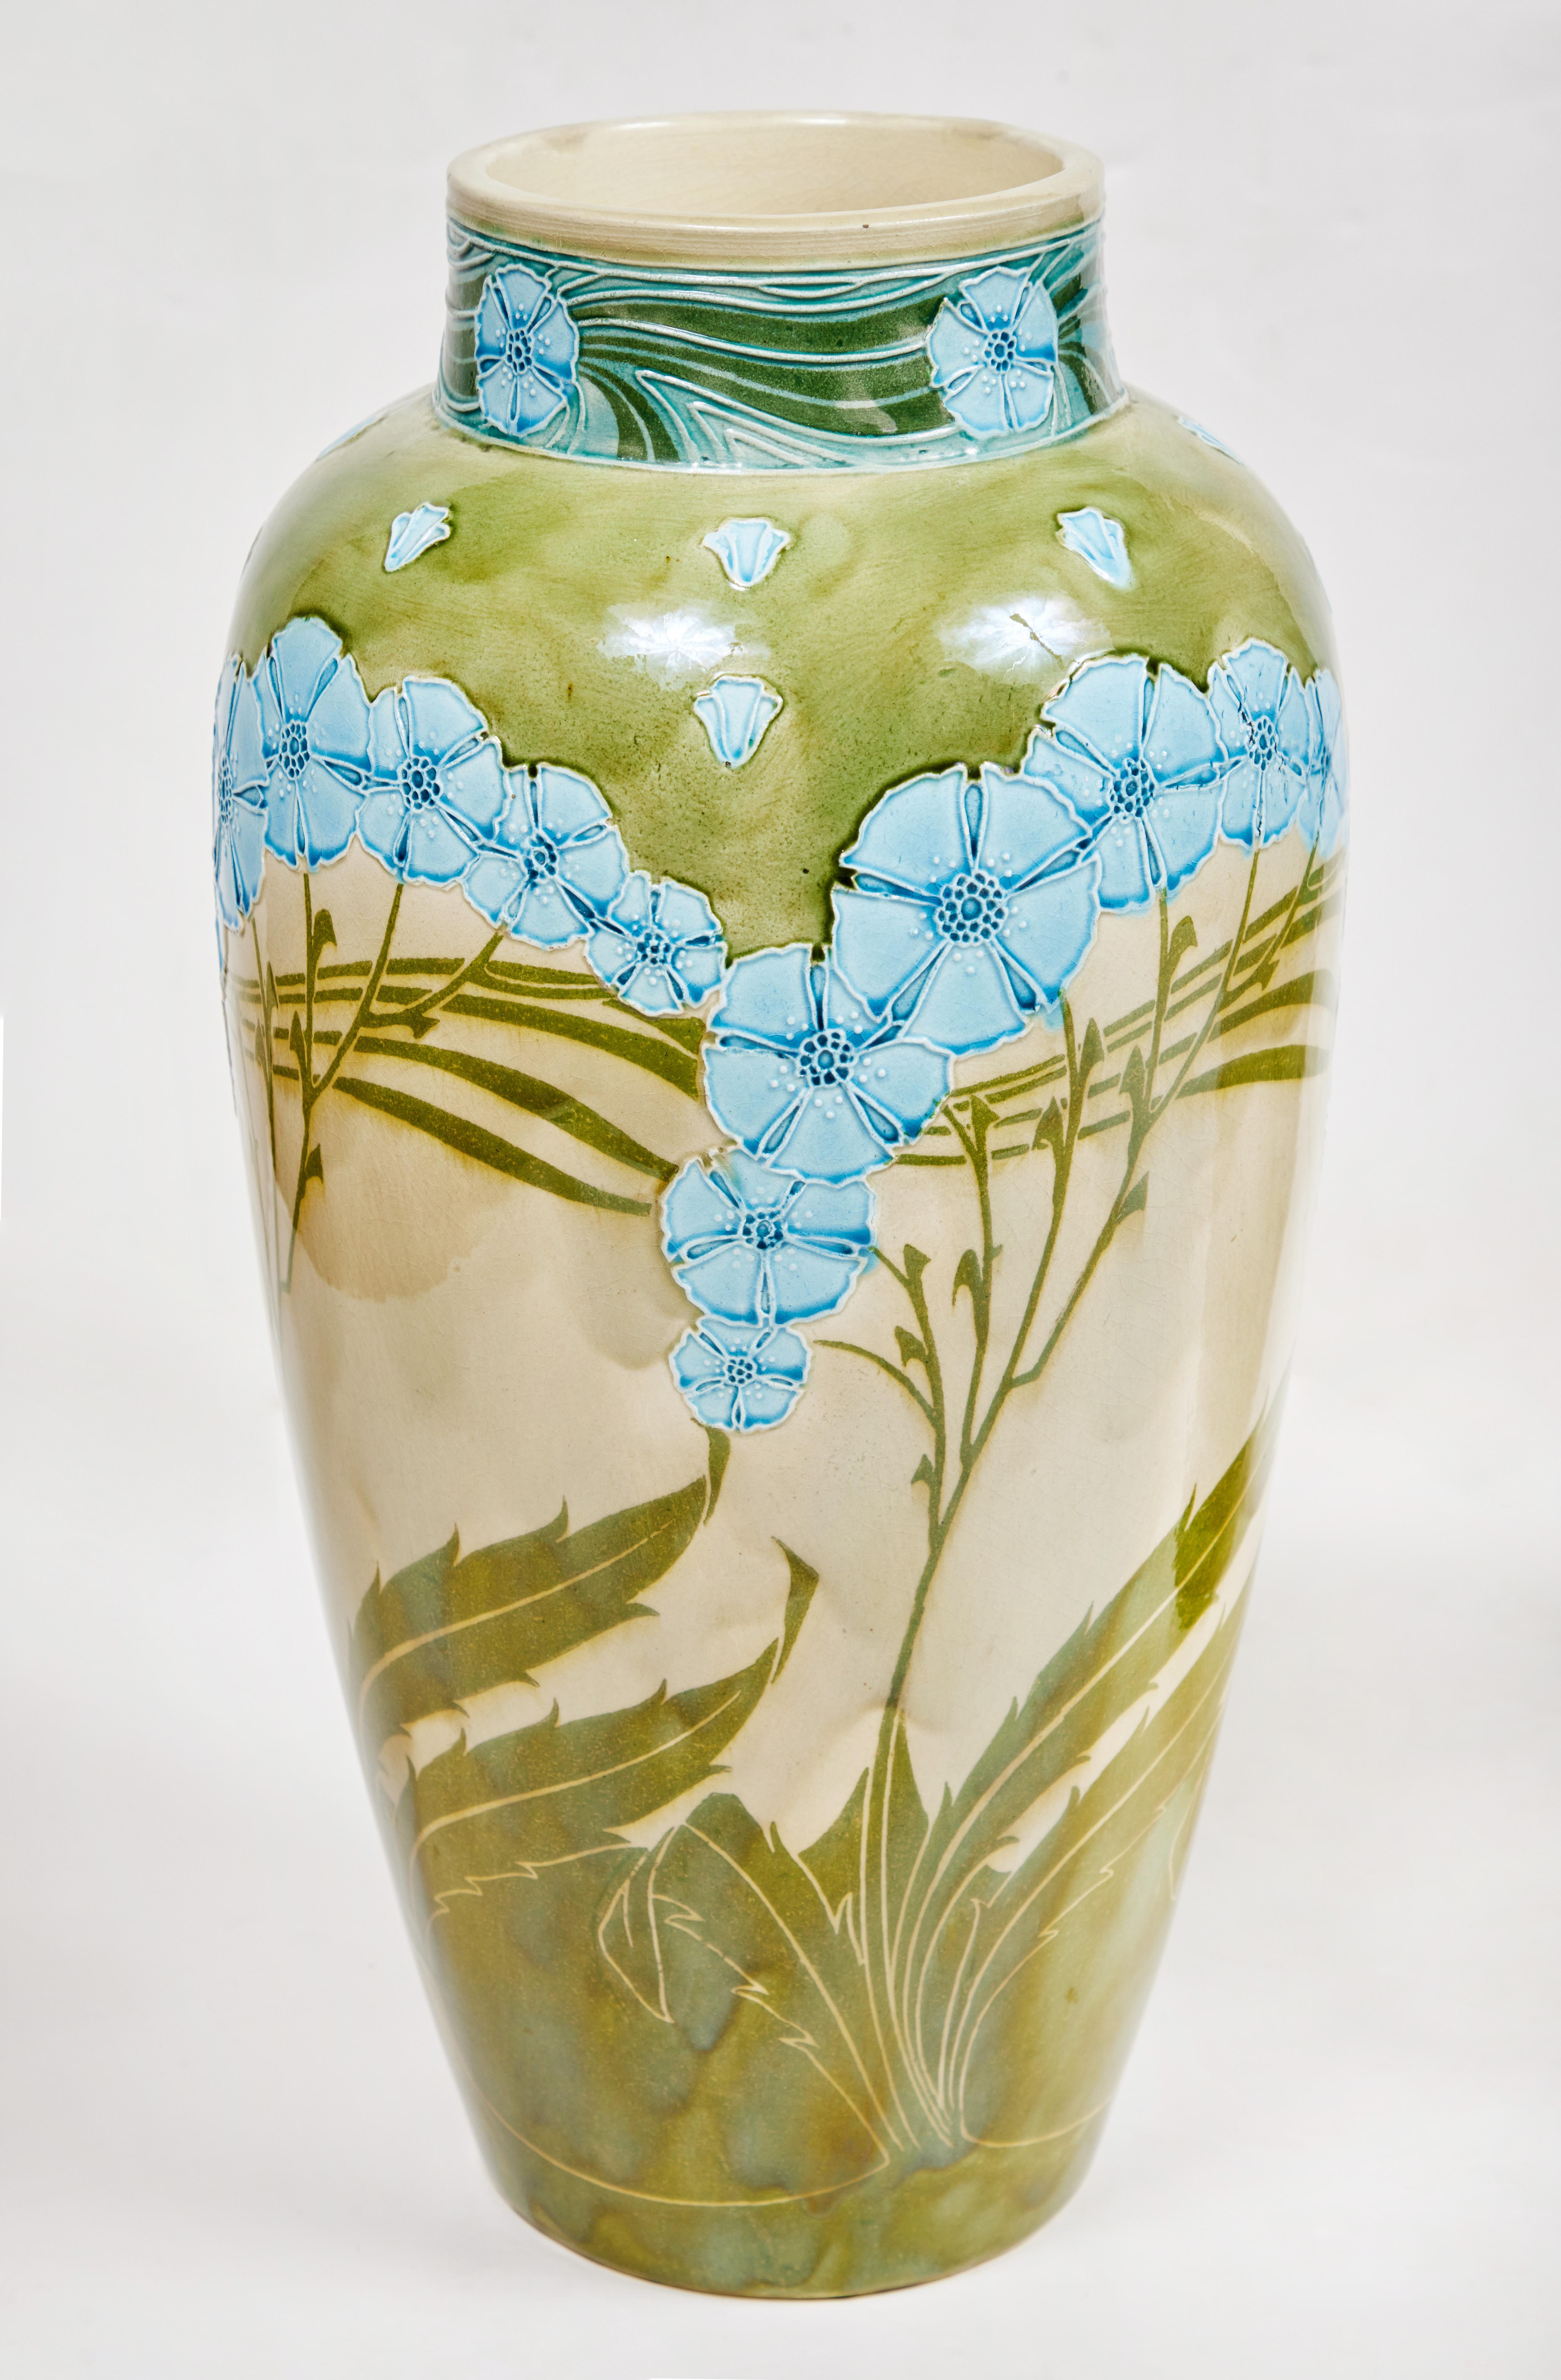 A striking, rare pair of large marked, Minton, Secessionist style, majolica glazed vases with a celadon ground and sprays of Robin's egg blue flowers amidst swaying leaves. Designed by by Léon Solon and John Wadsworth, who drew inspiration from both